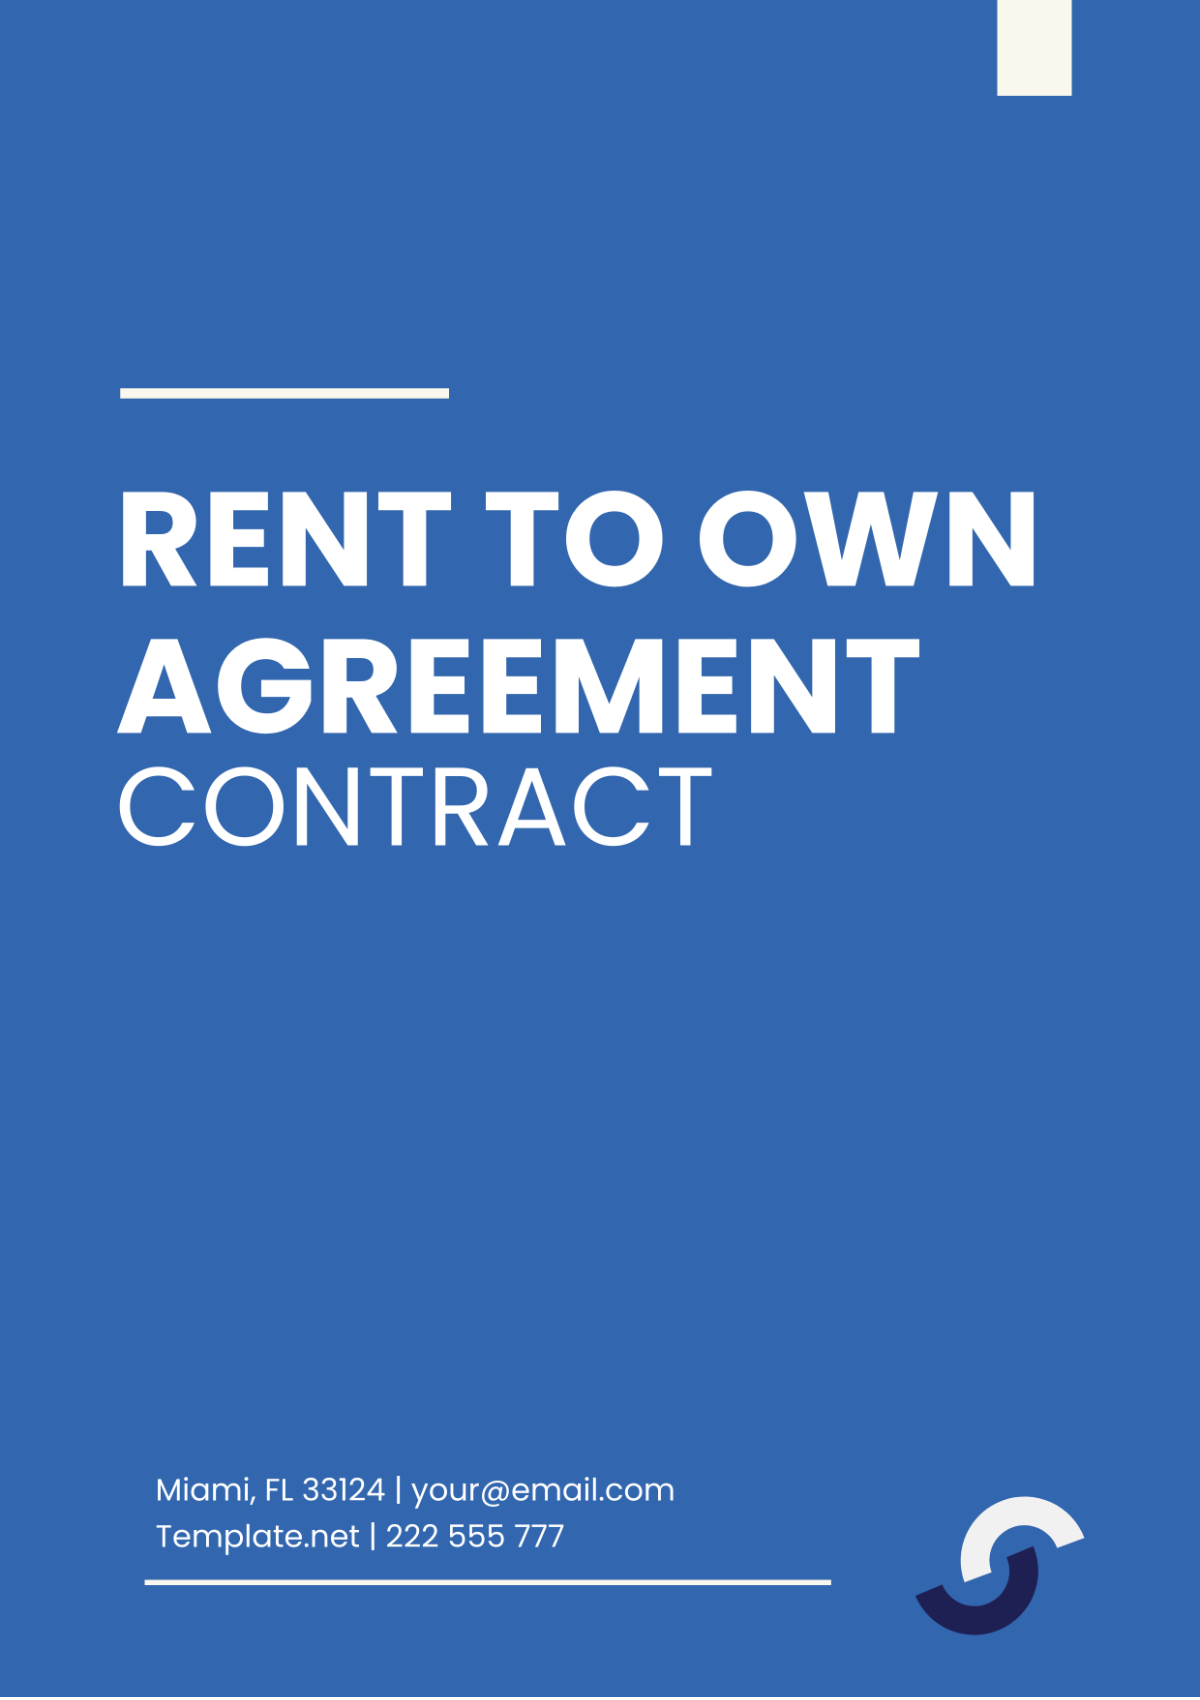 Rent to Own Agreement Contract Template